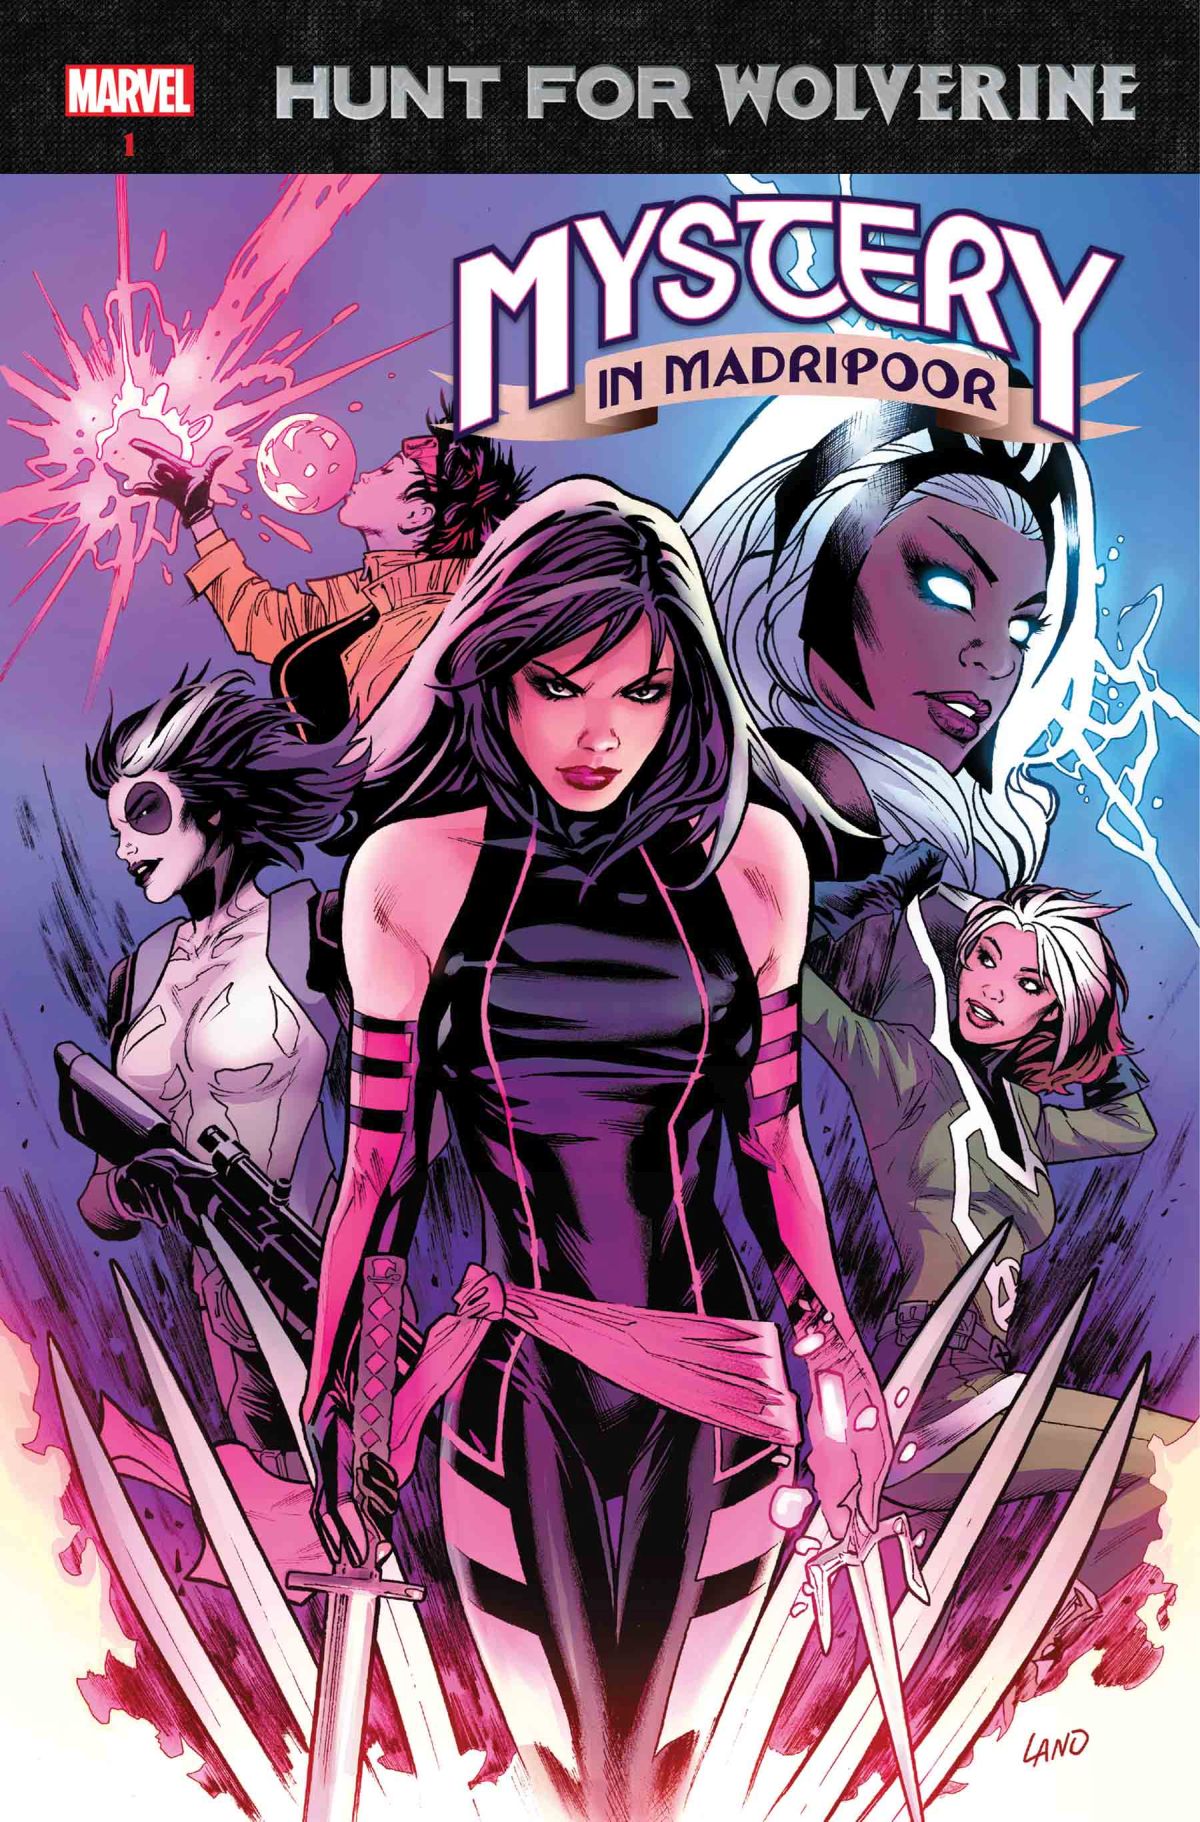 HUNT FOR WOLVERINE: MYSTERY IN MADRIPOOR #1 (of 4)